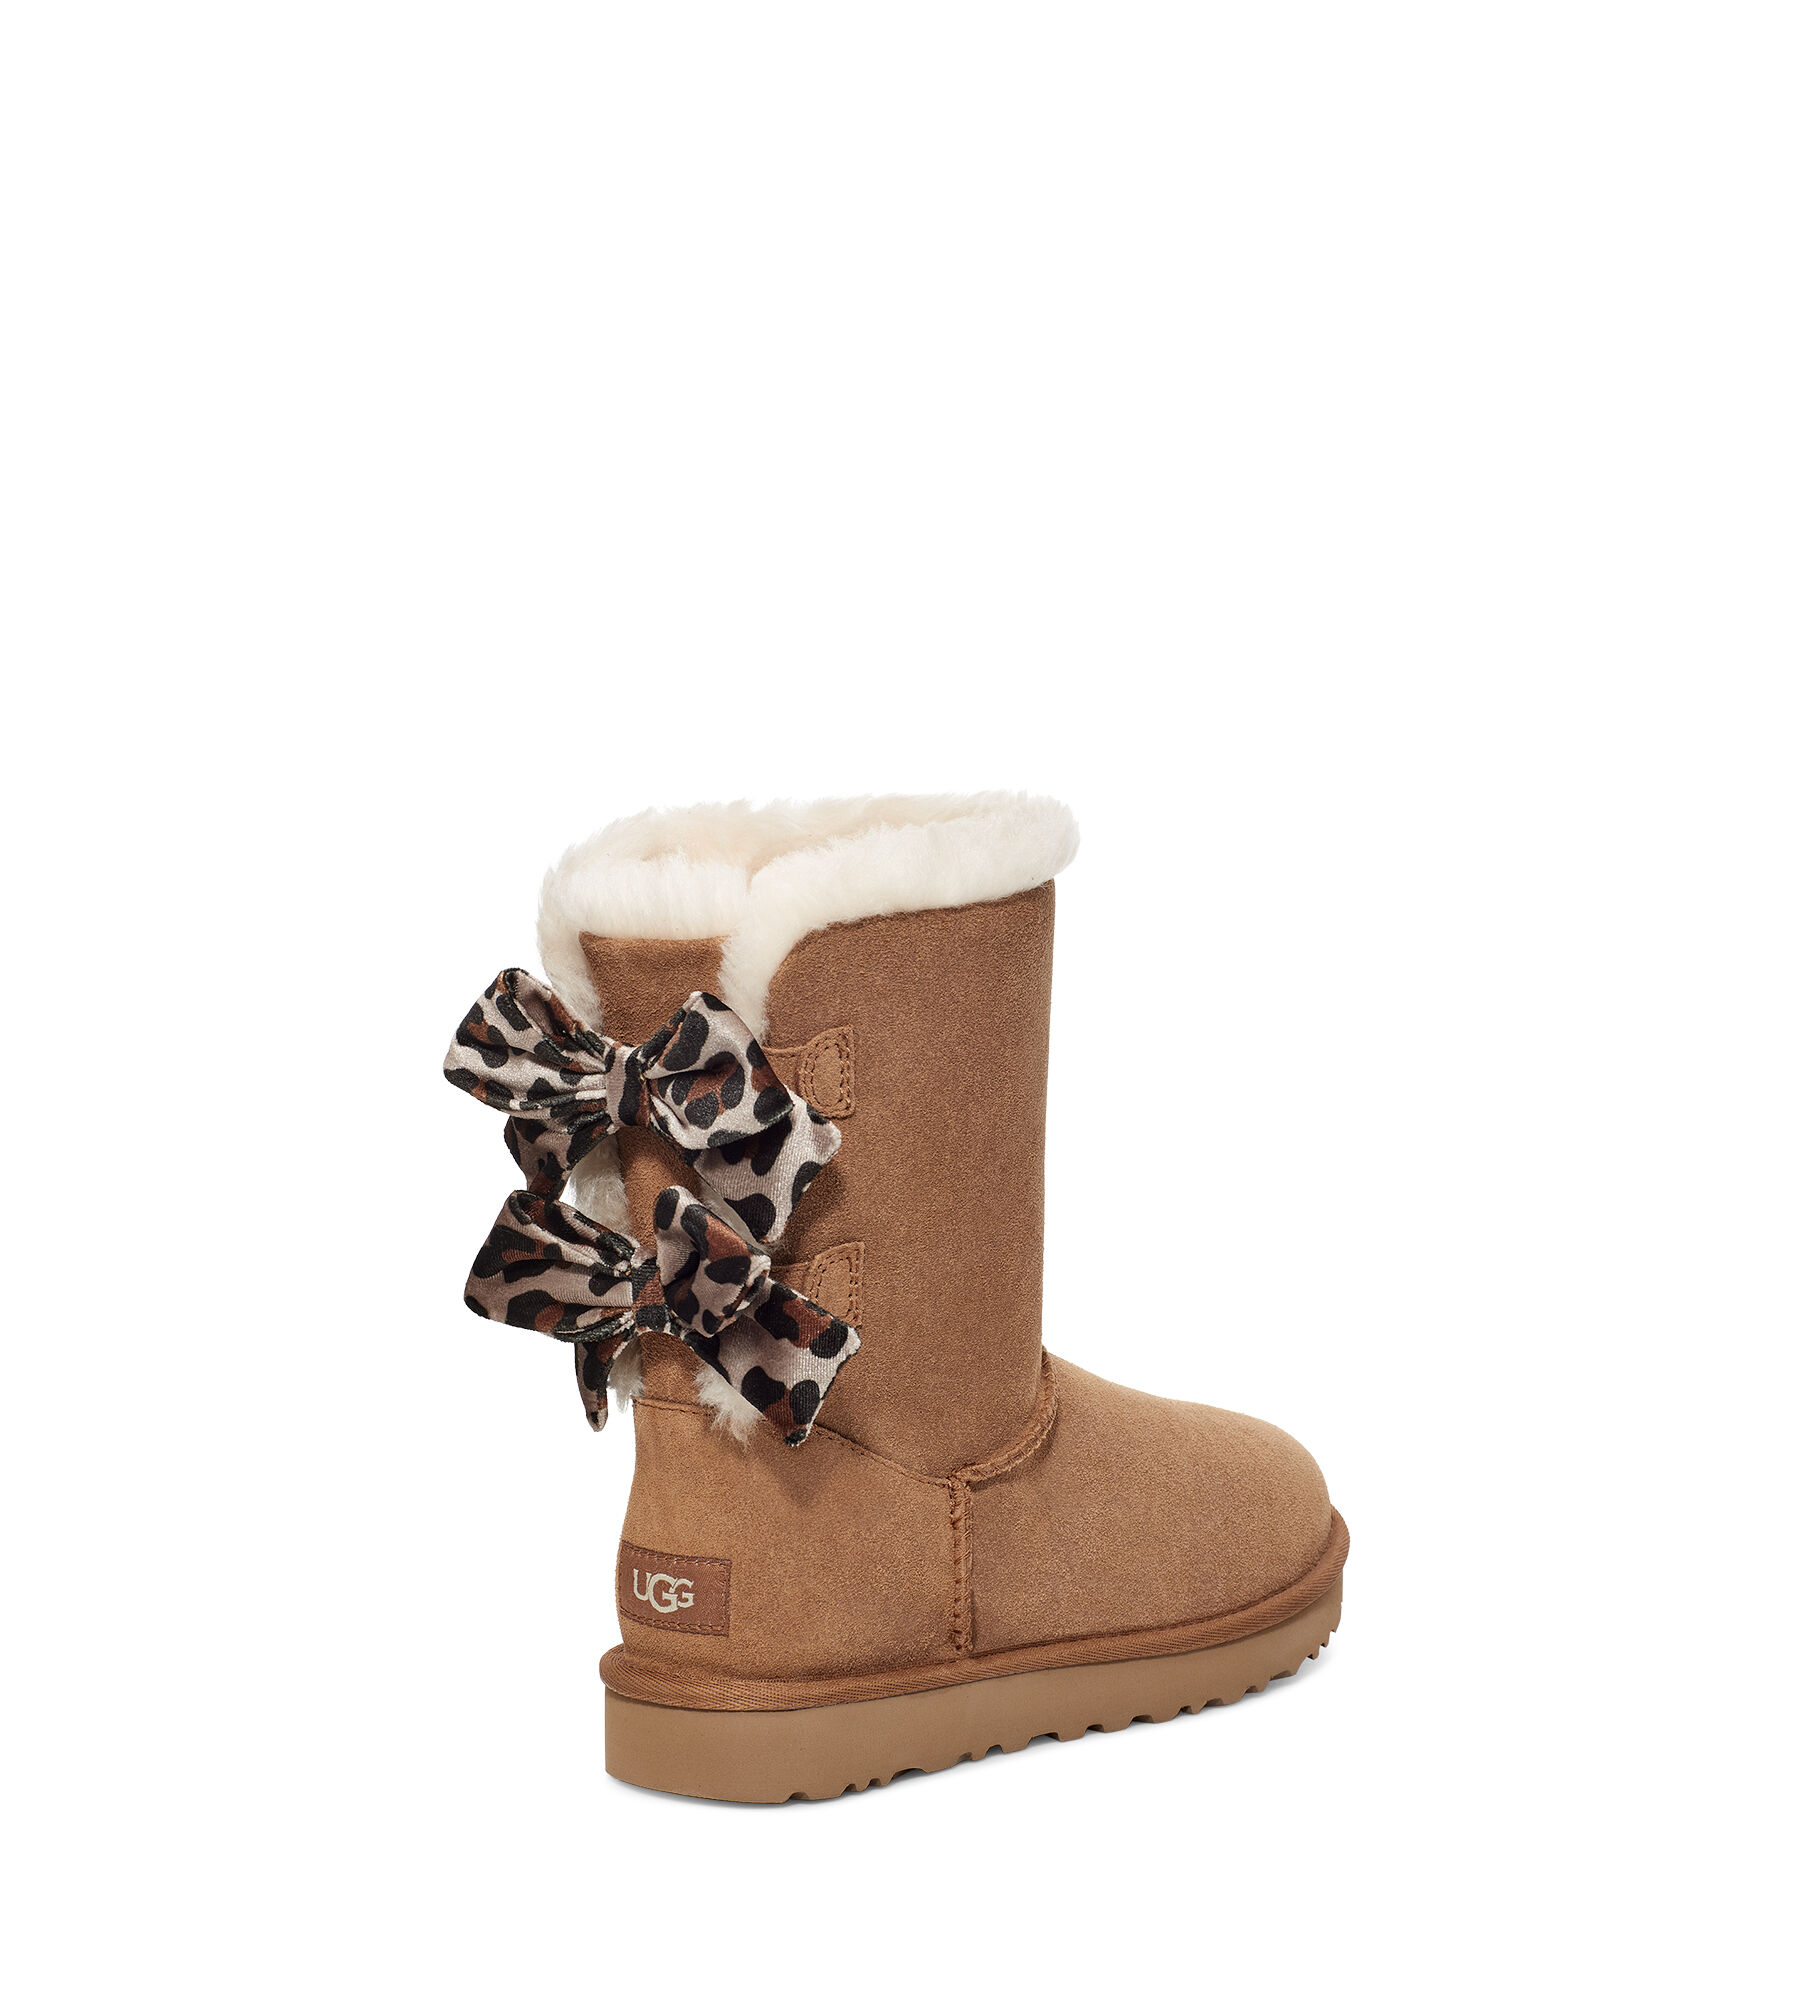 uk ugg boots on sale cheap